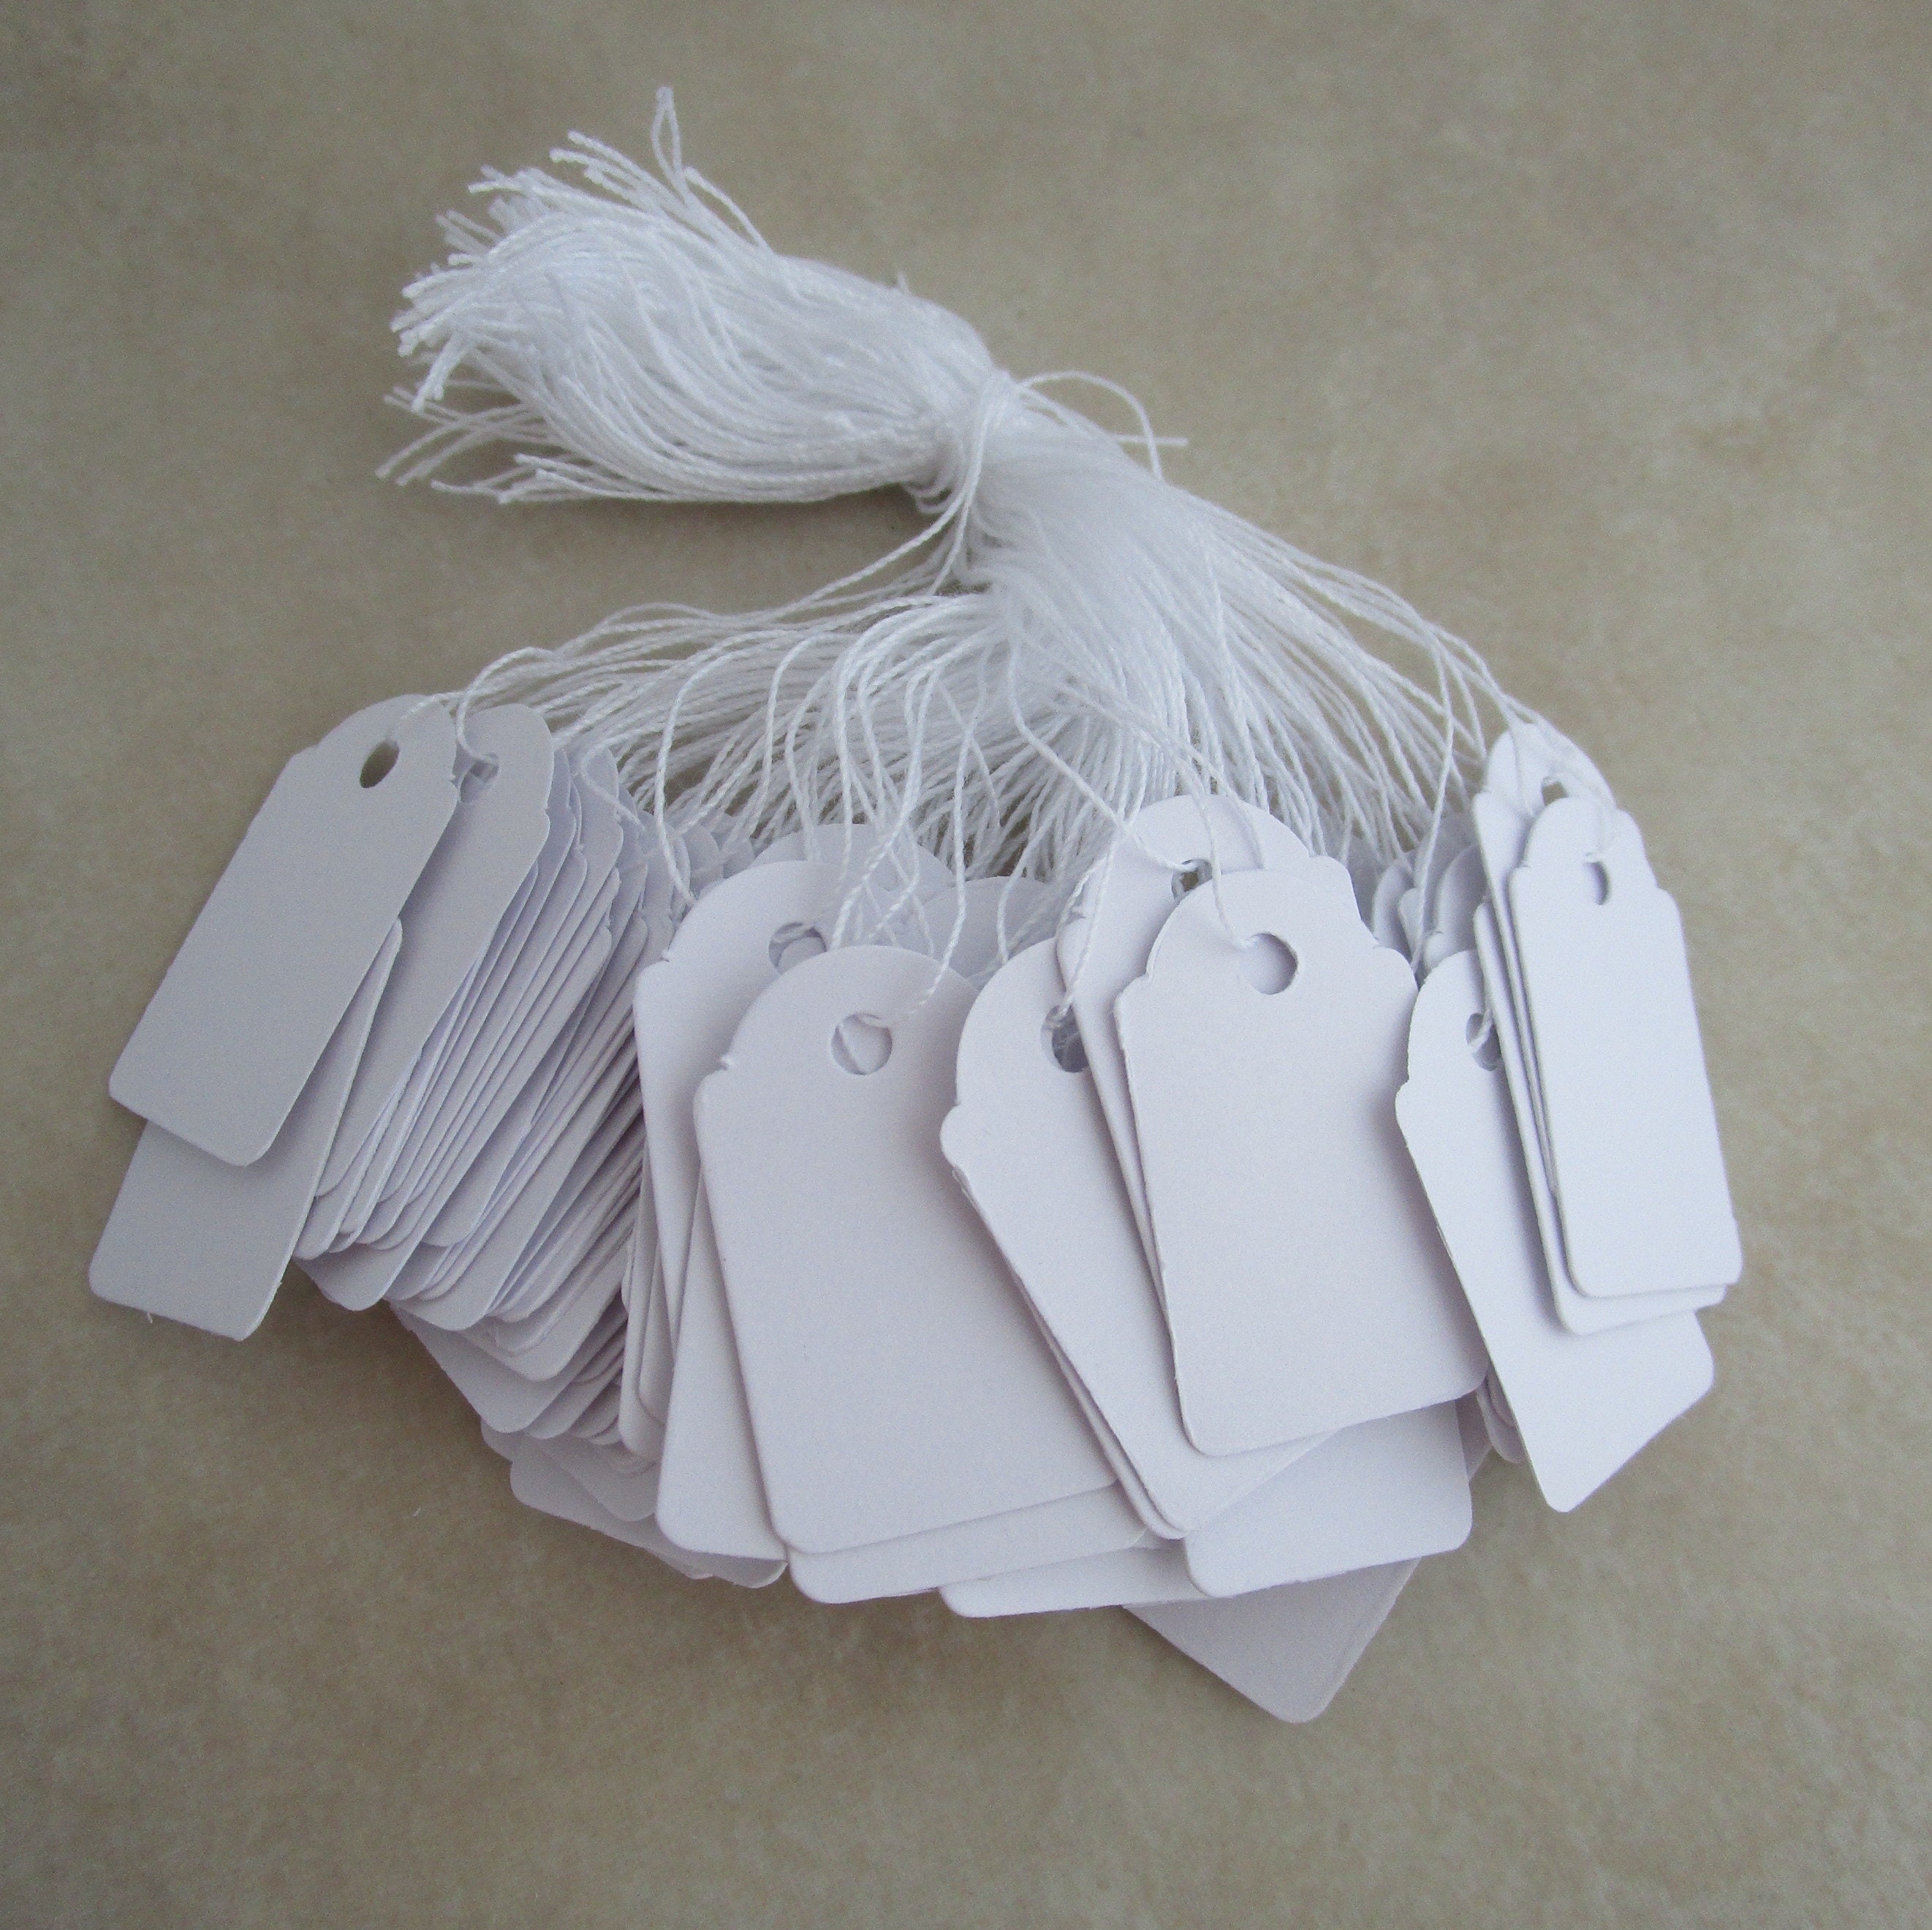 G2PLUS 500pcs Small Price Tags with String,1.8 x 1 Clothes Size Tags Coupon Tags Making Tag White Store Tags Clothing Tags for Product Jewelry Clothing